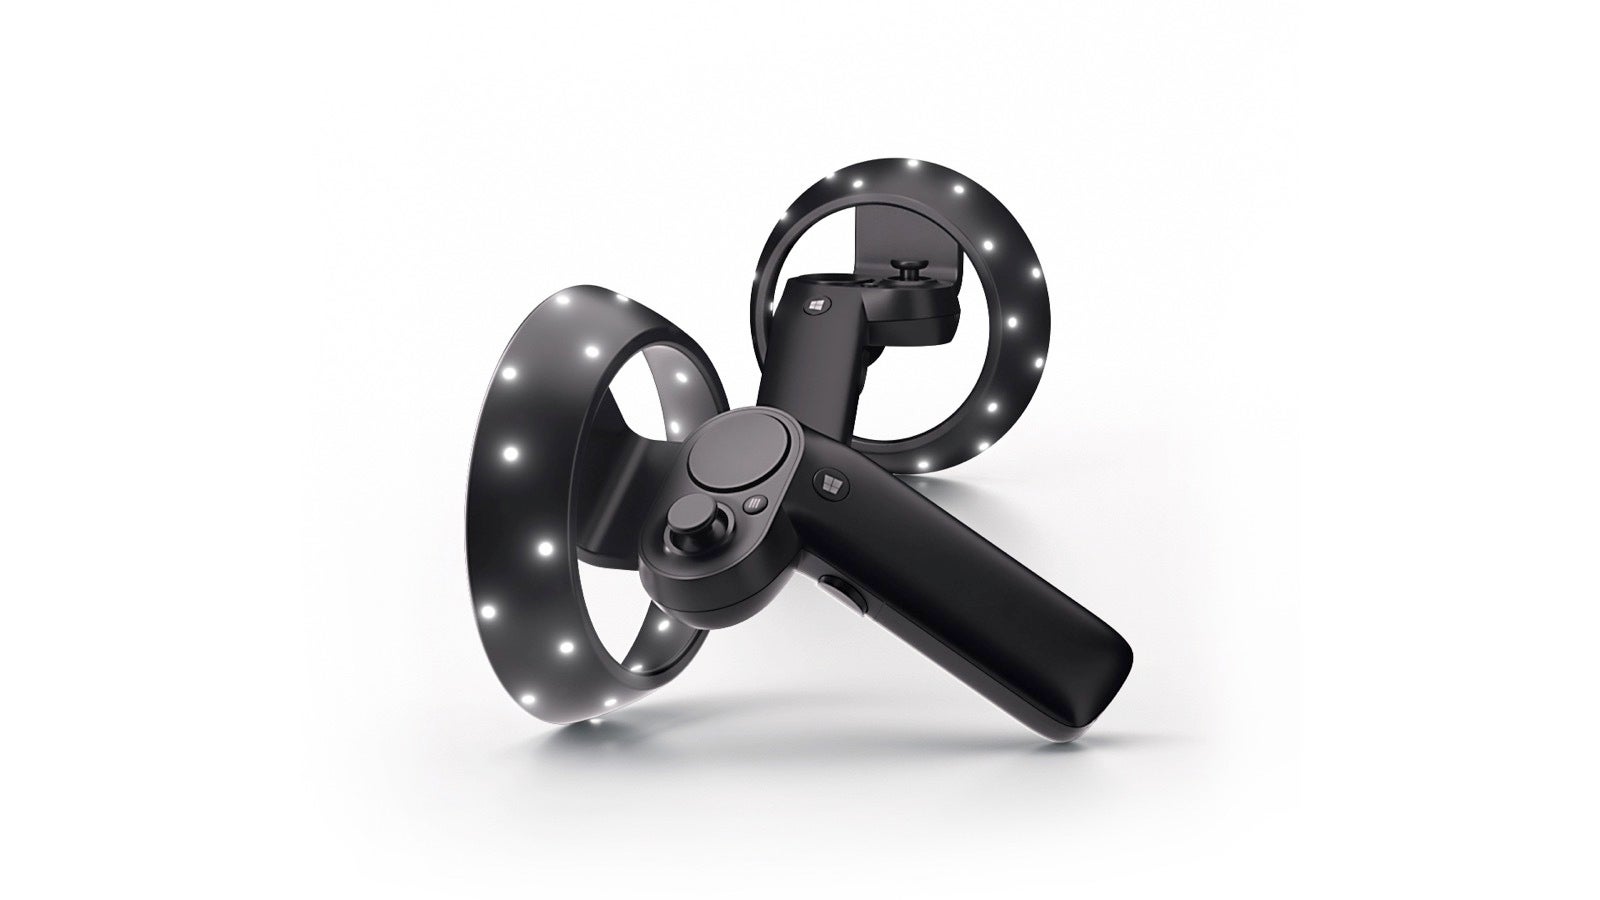 Image for Microsoft's bringing its own motion controllers to market this holiday for Windows 10 VR headsets